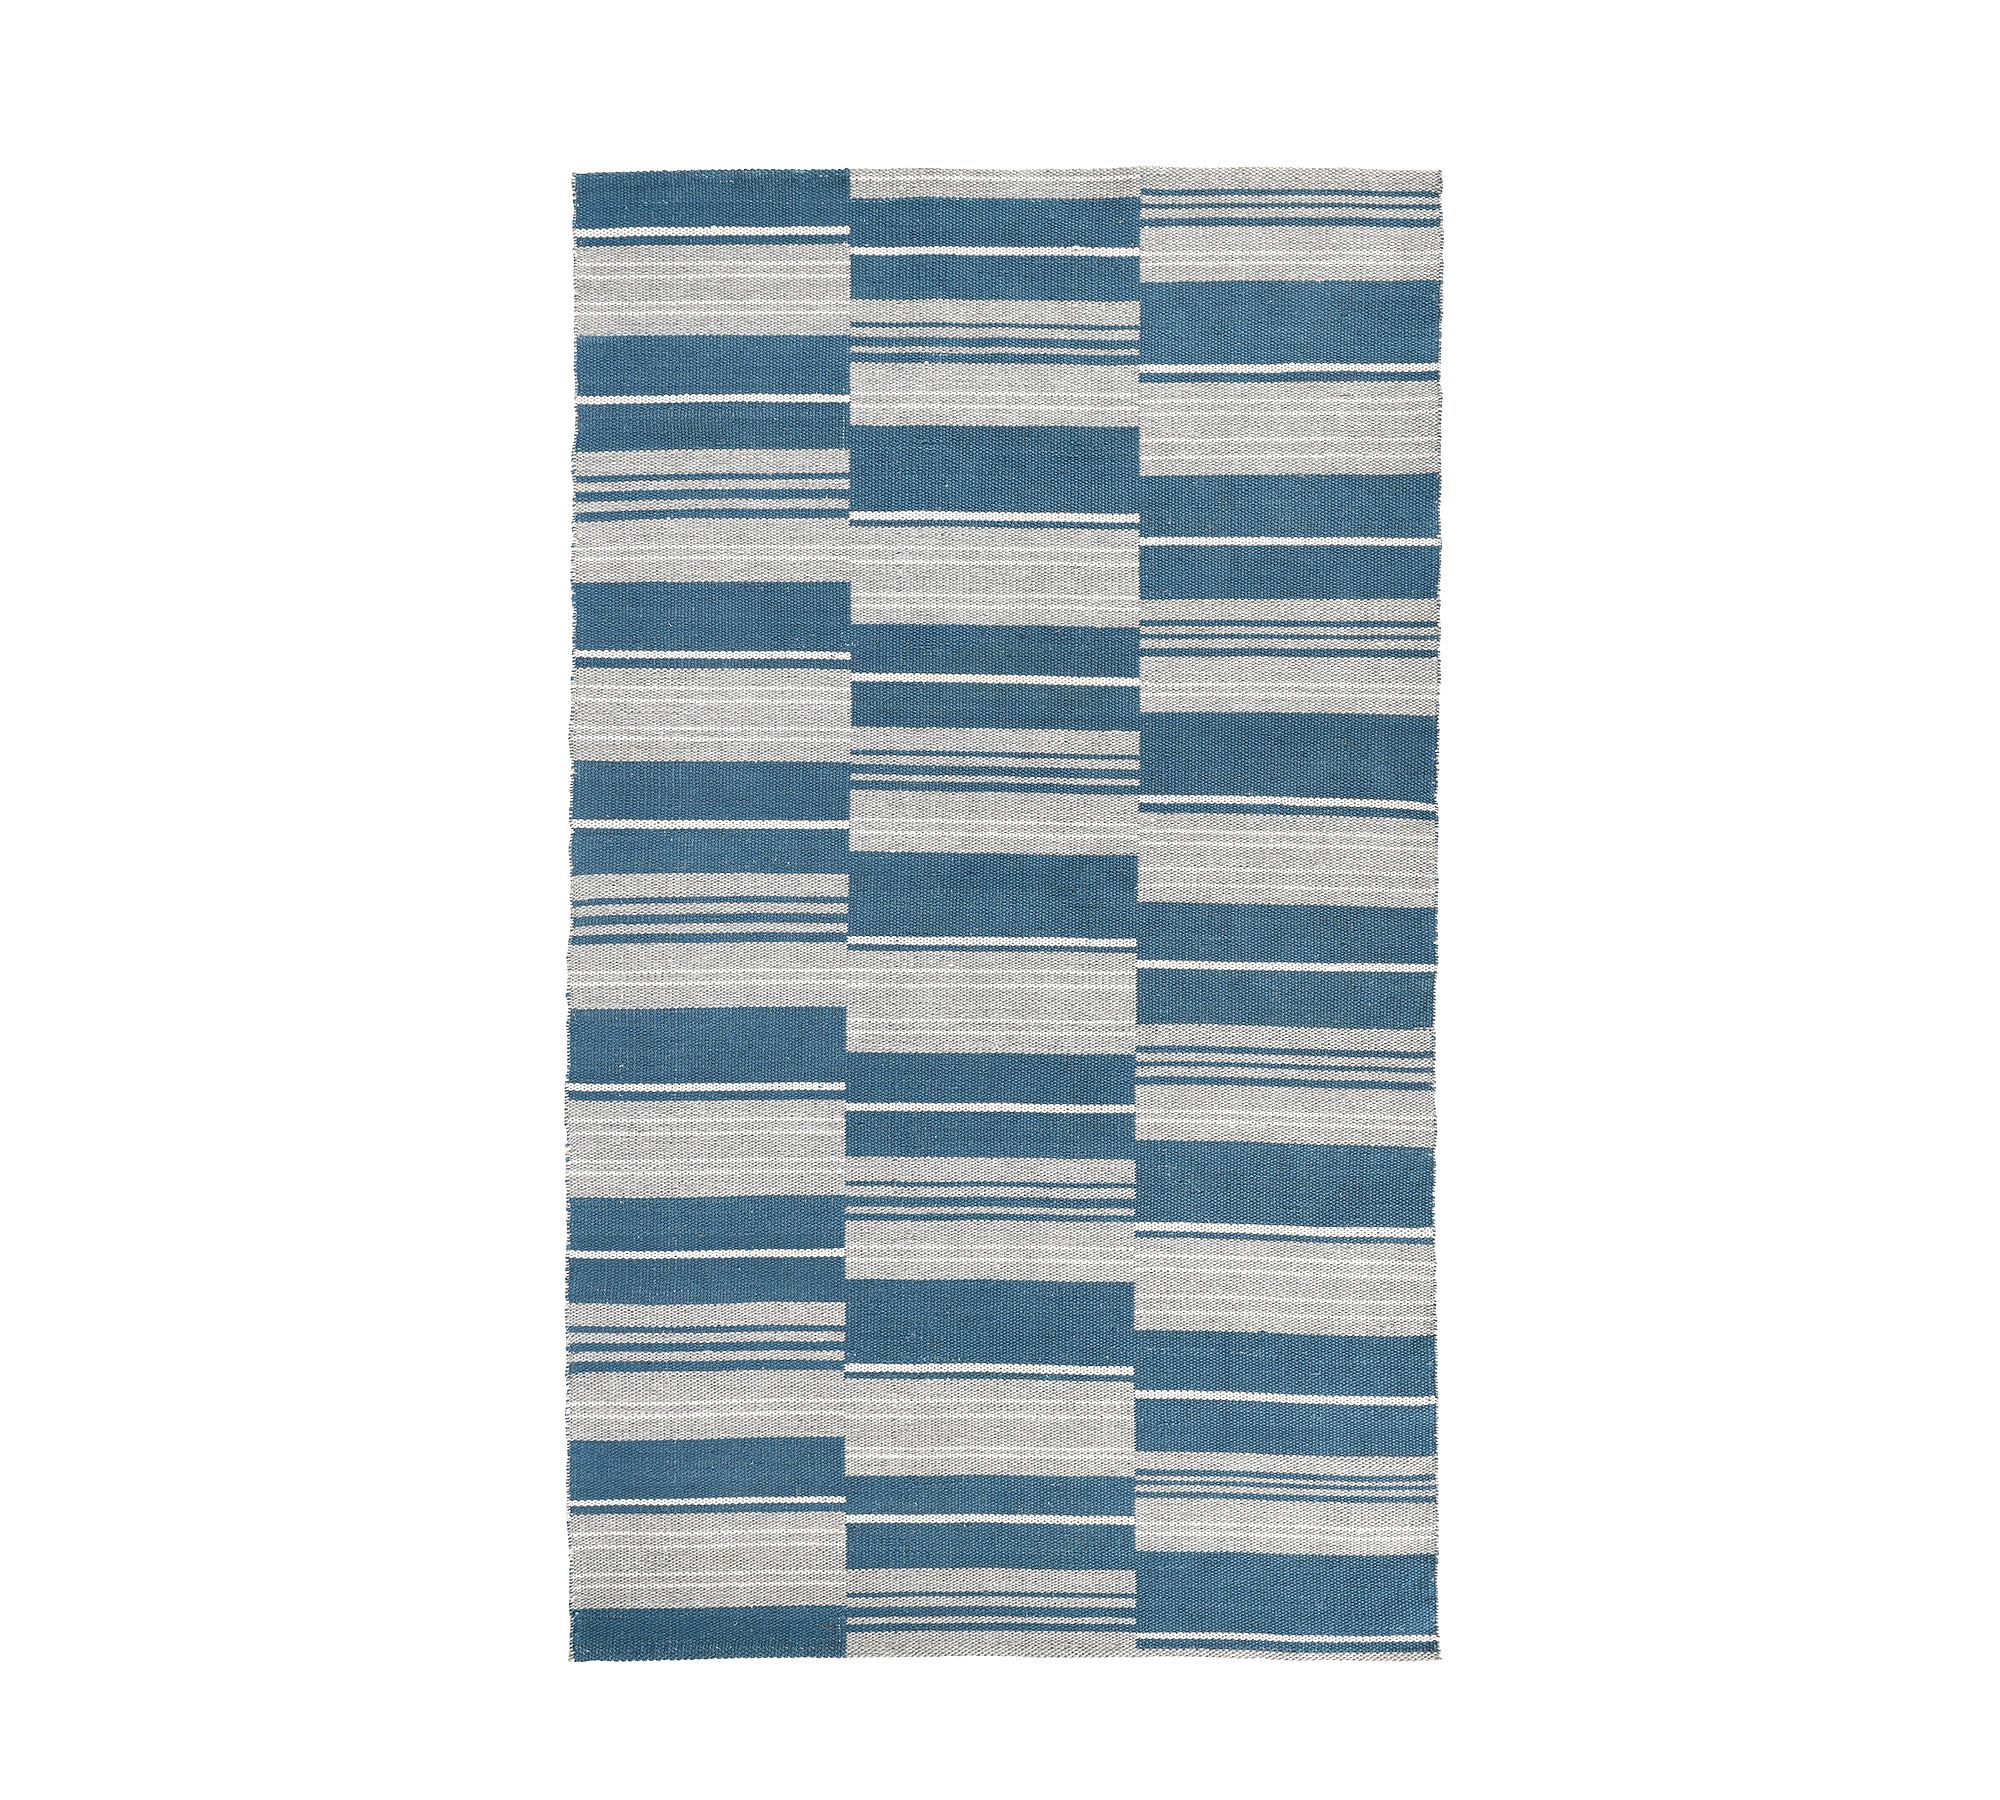 Daley Handwoven Striped Outdoor Performance Rug